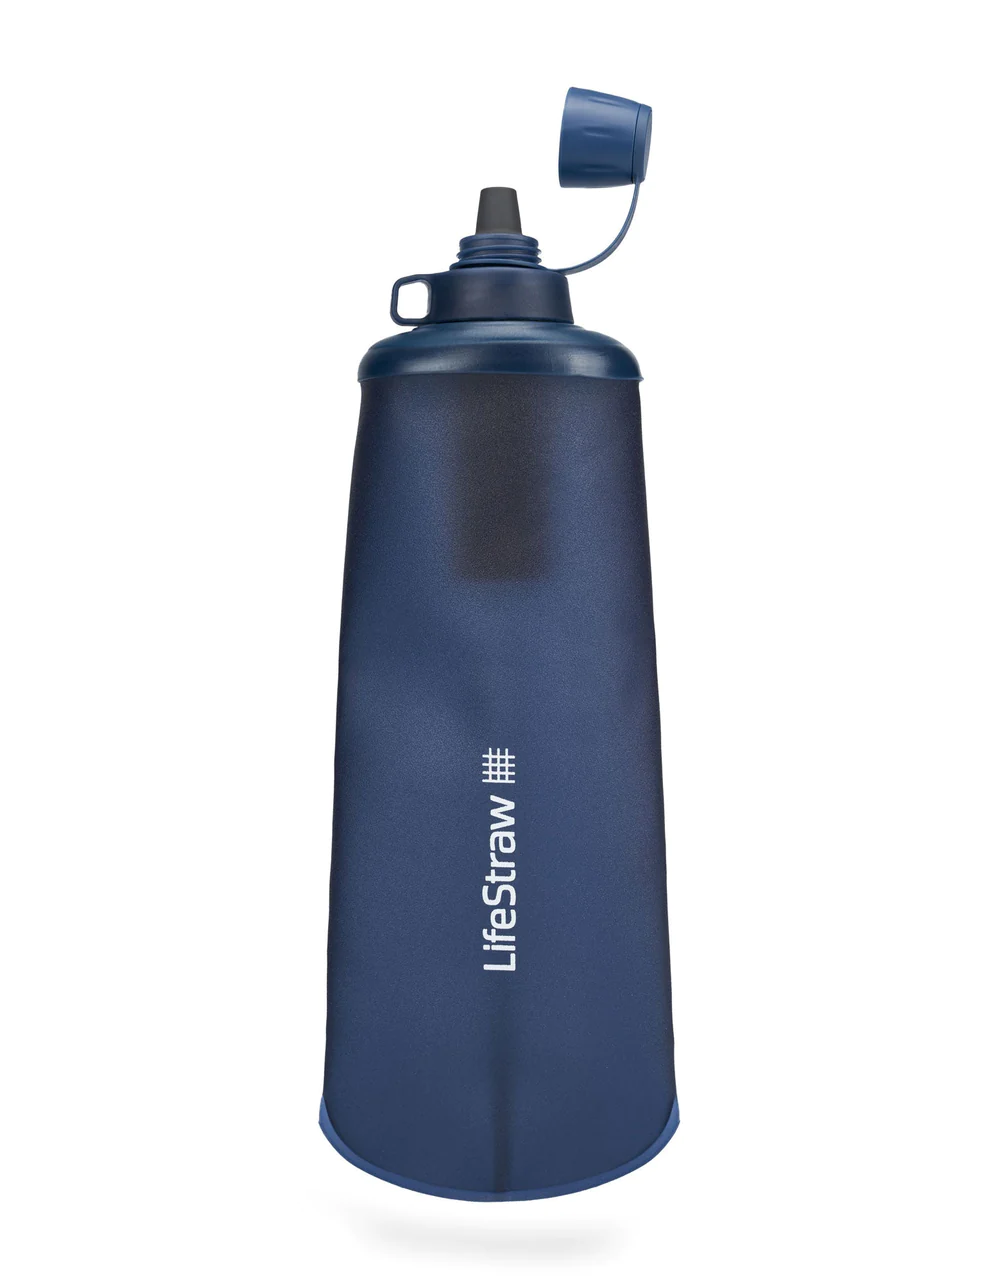 LifeStraw LifeStraw Peak Series Collapsible Squeeze Bottle With Filter